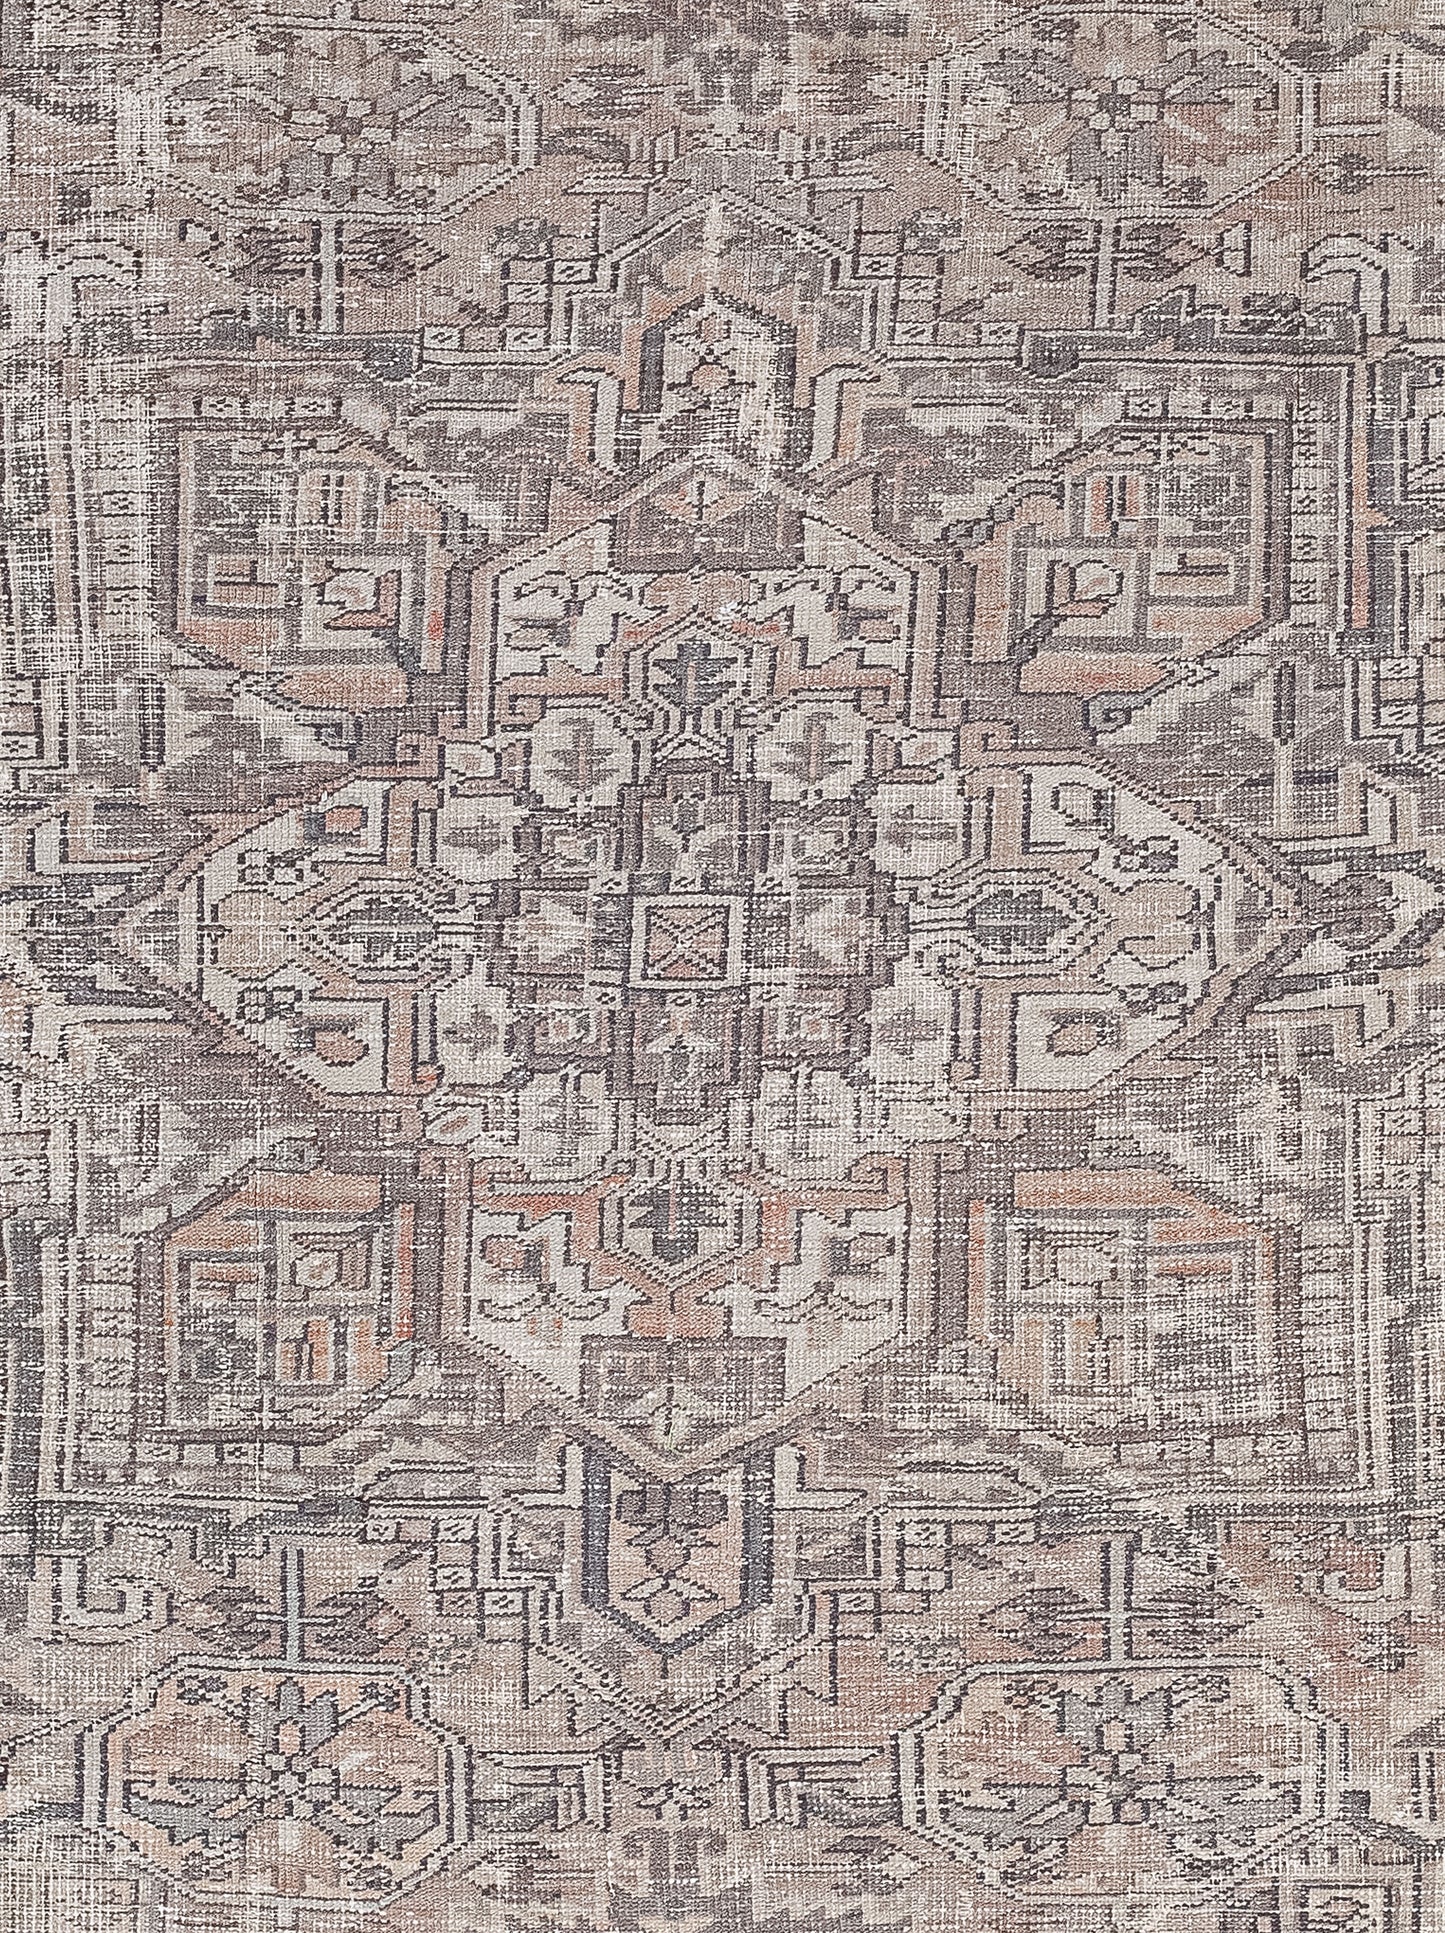 The foreground of the rug tells a story represented with crosses, squares, pyramids, all arranged symmetrically. 